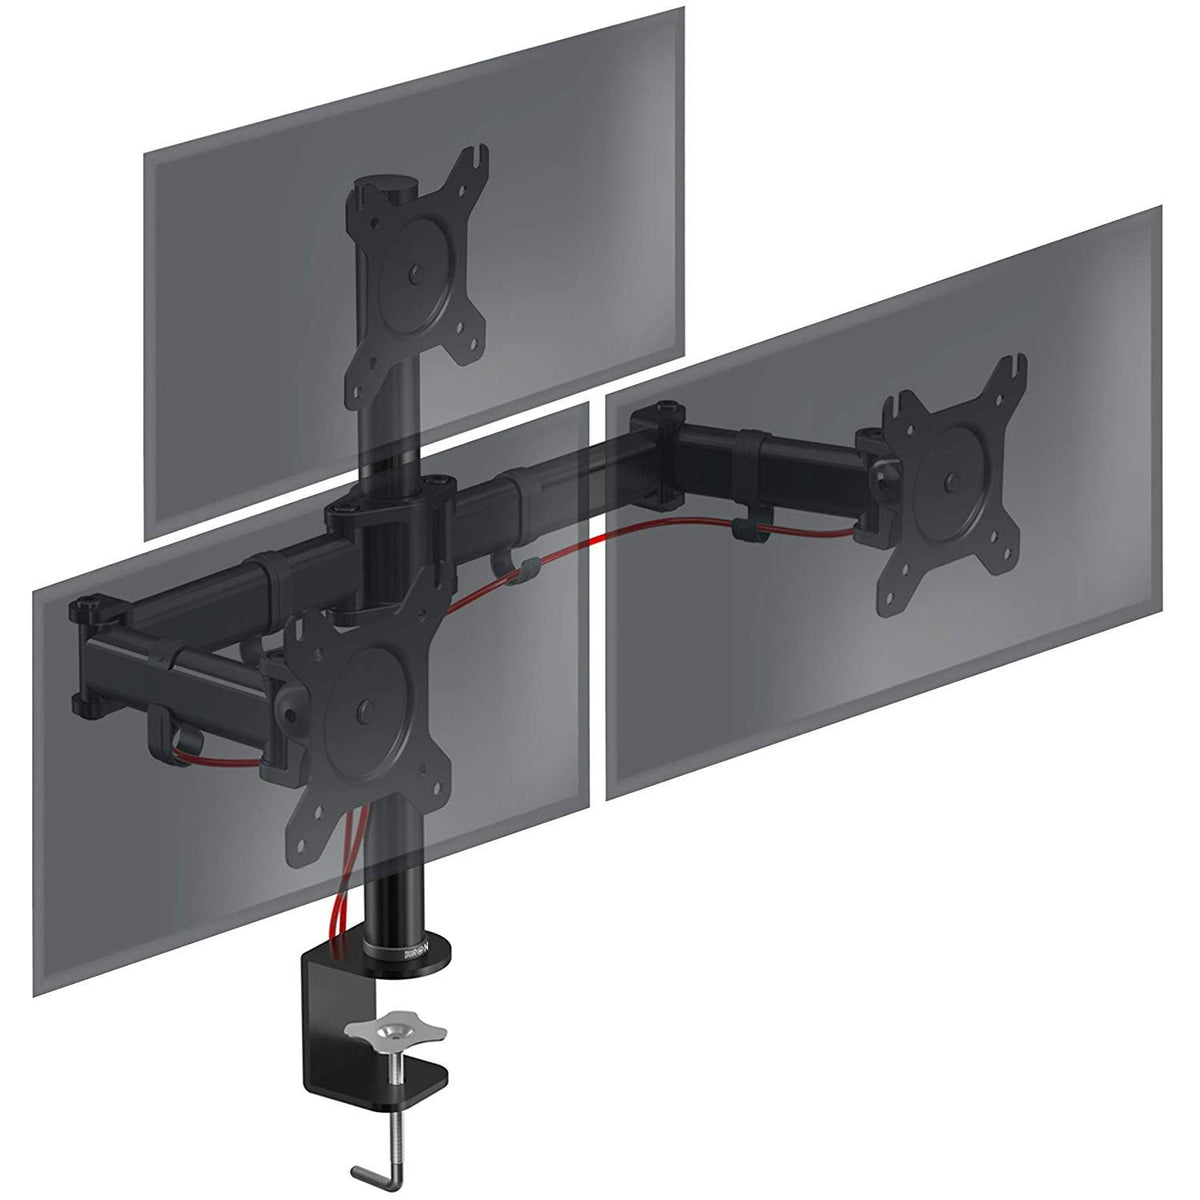 Duronic Monitor Arm Stand DM253 | Triple PC Desk Mount | Steel